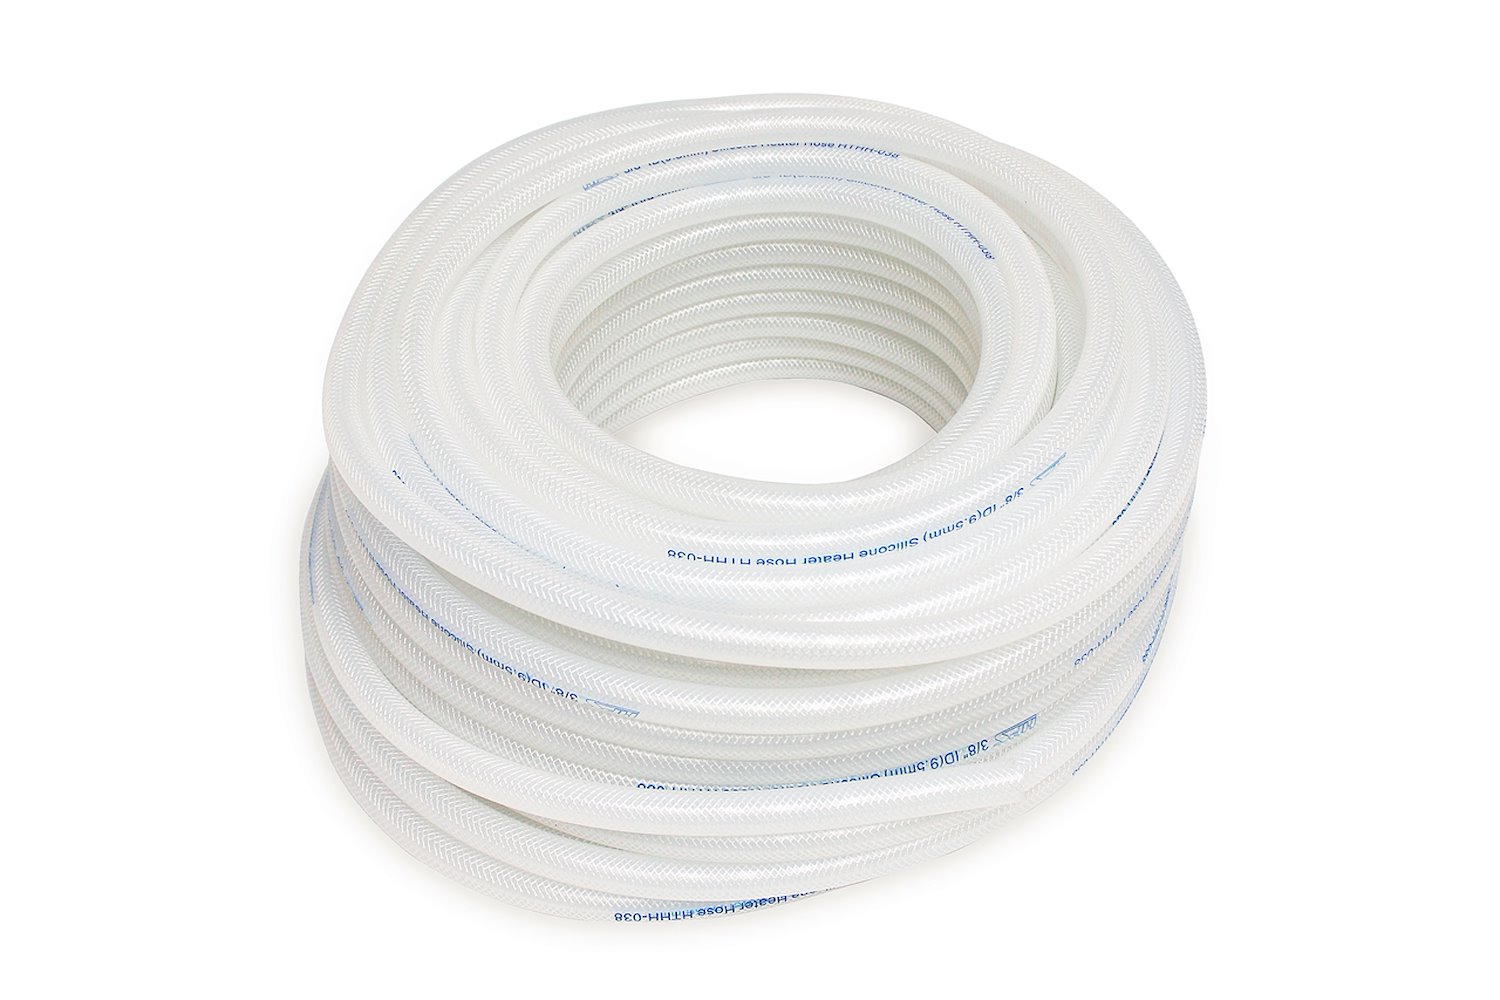 HTHH-050-CLEARx100 Silicone Heater Hose Tubing, High-Temp Reinforced, 1/2 in. ID, 100 ft. Roll, Clear